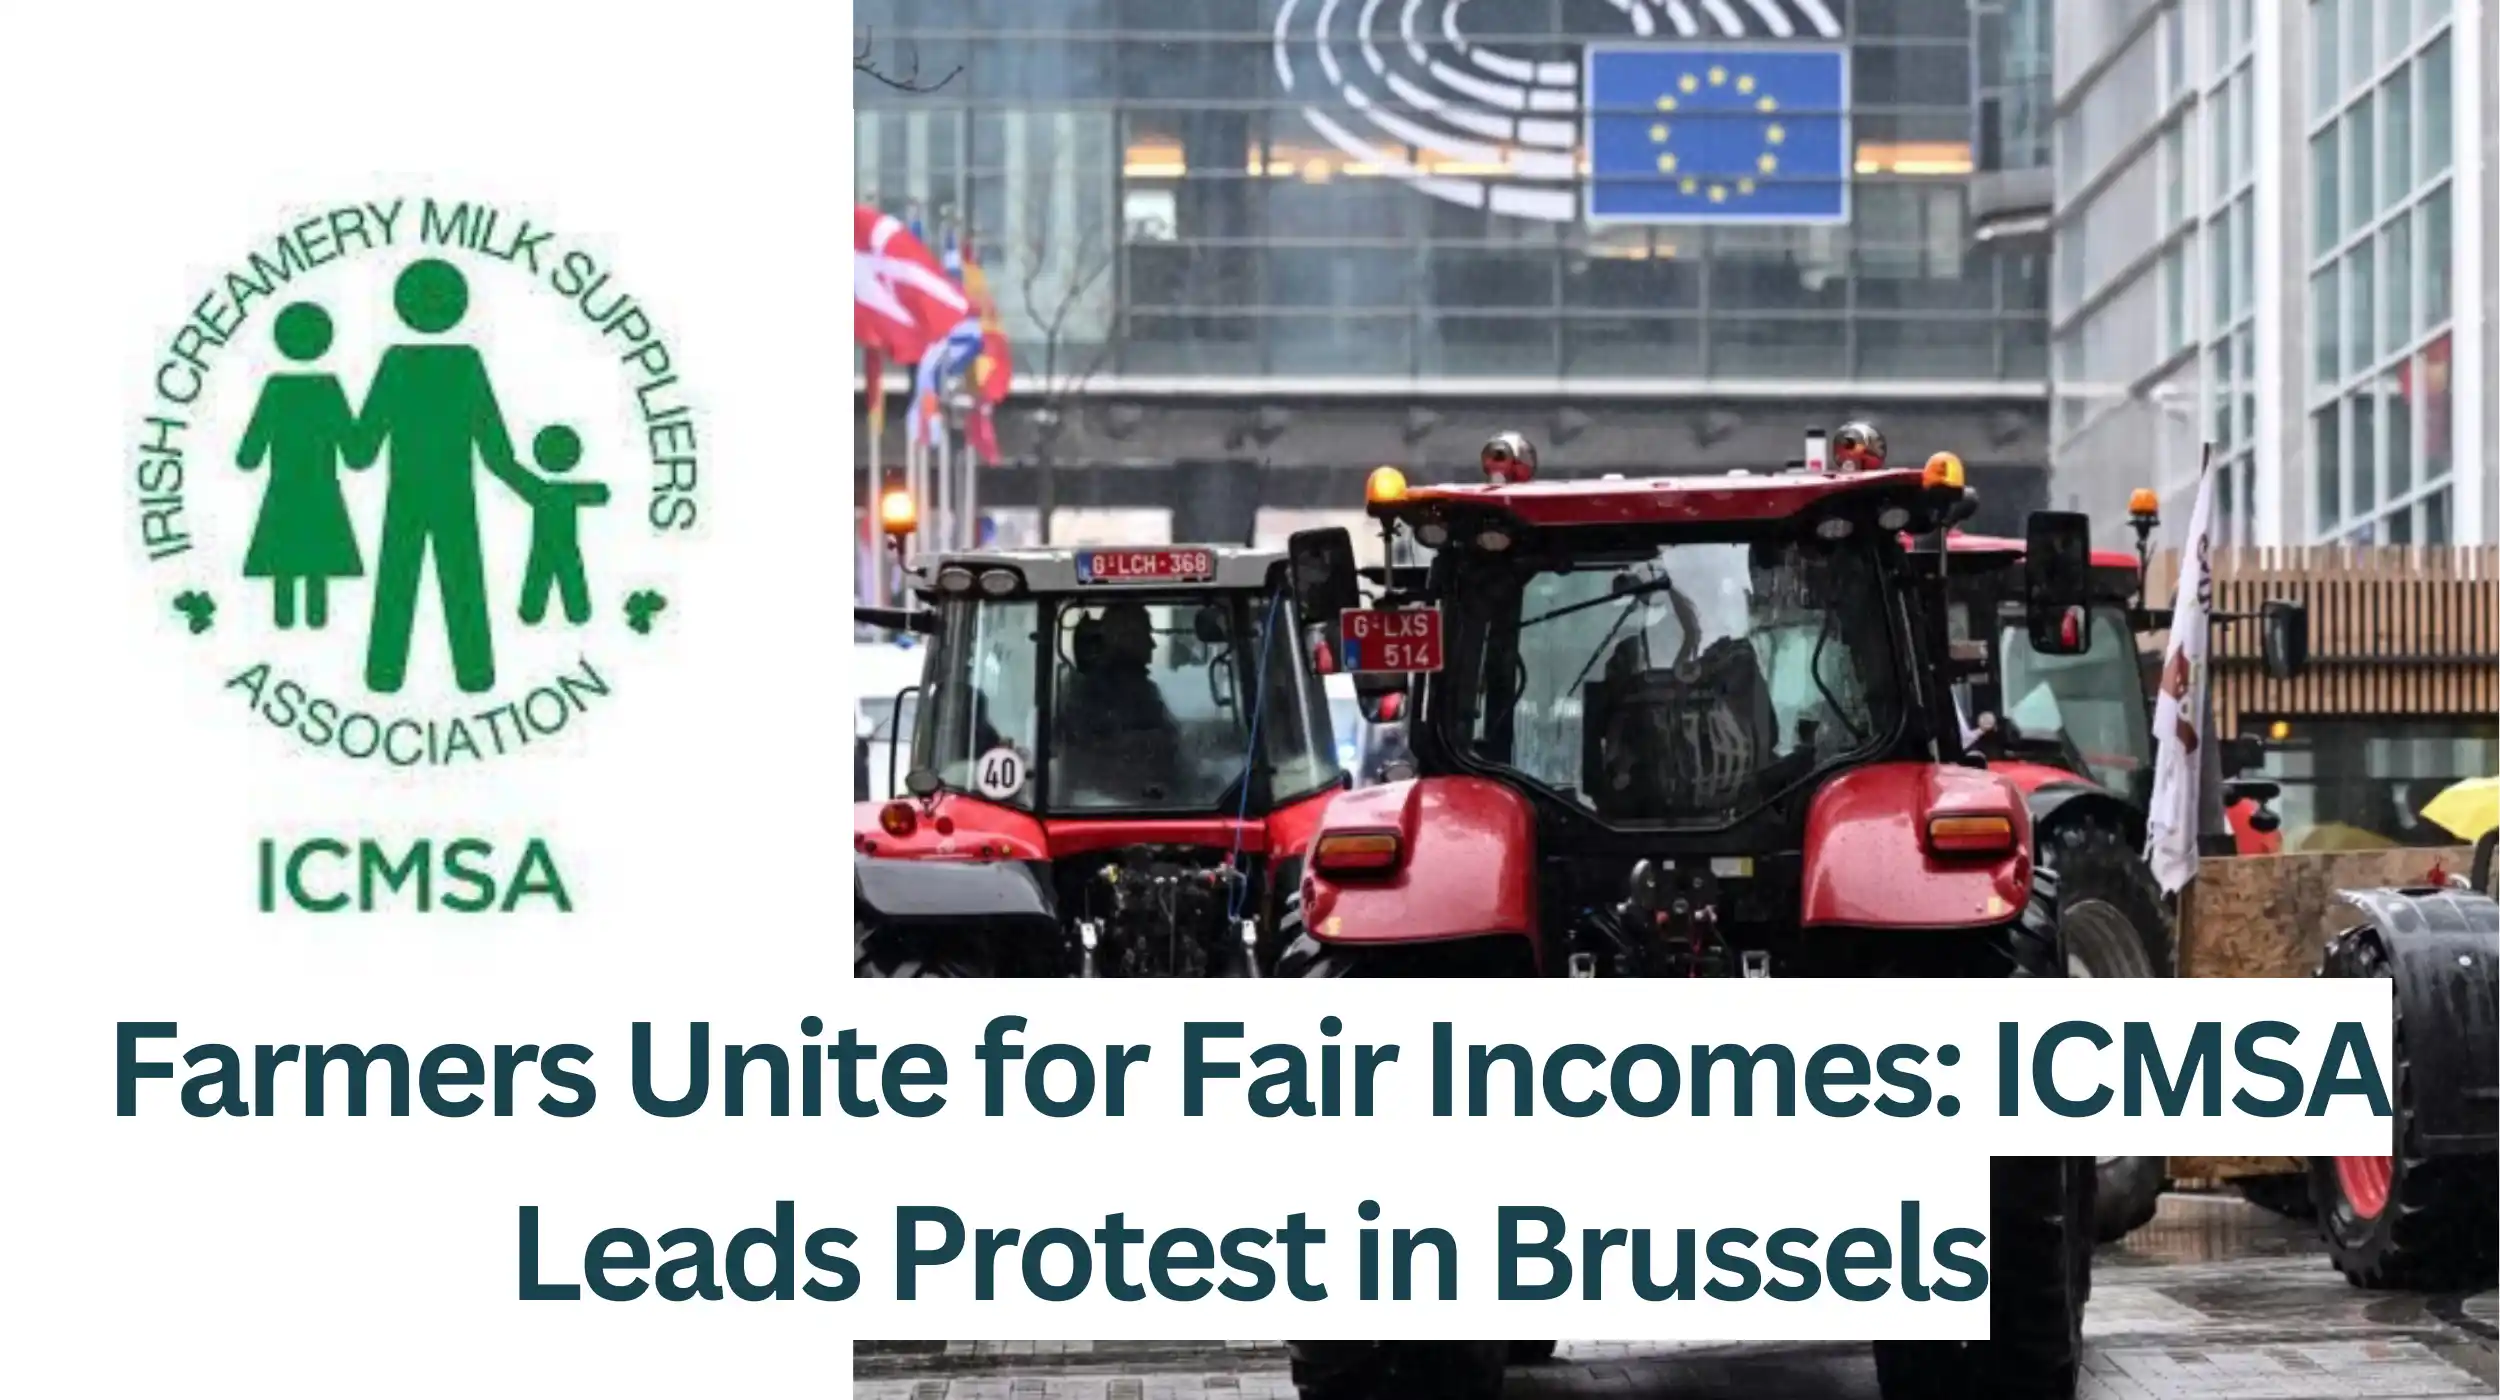 ICMSA-Leads-Protest-in-Brussels